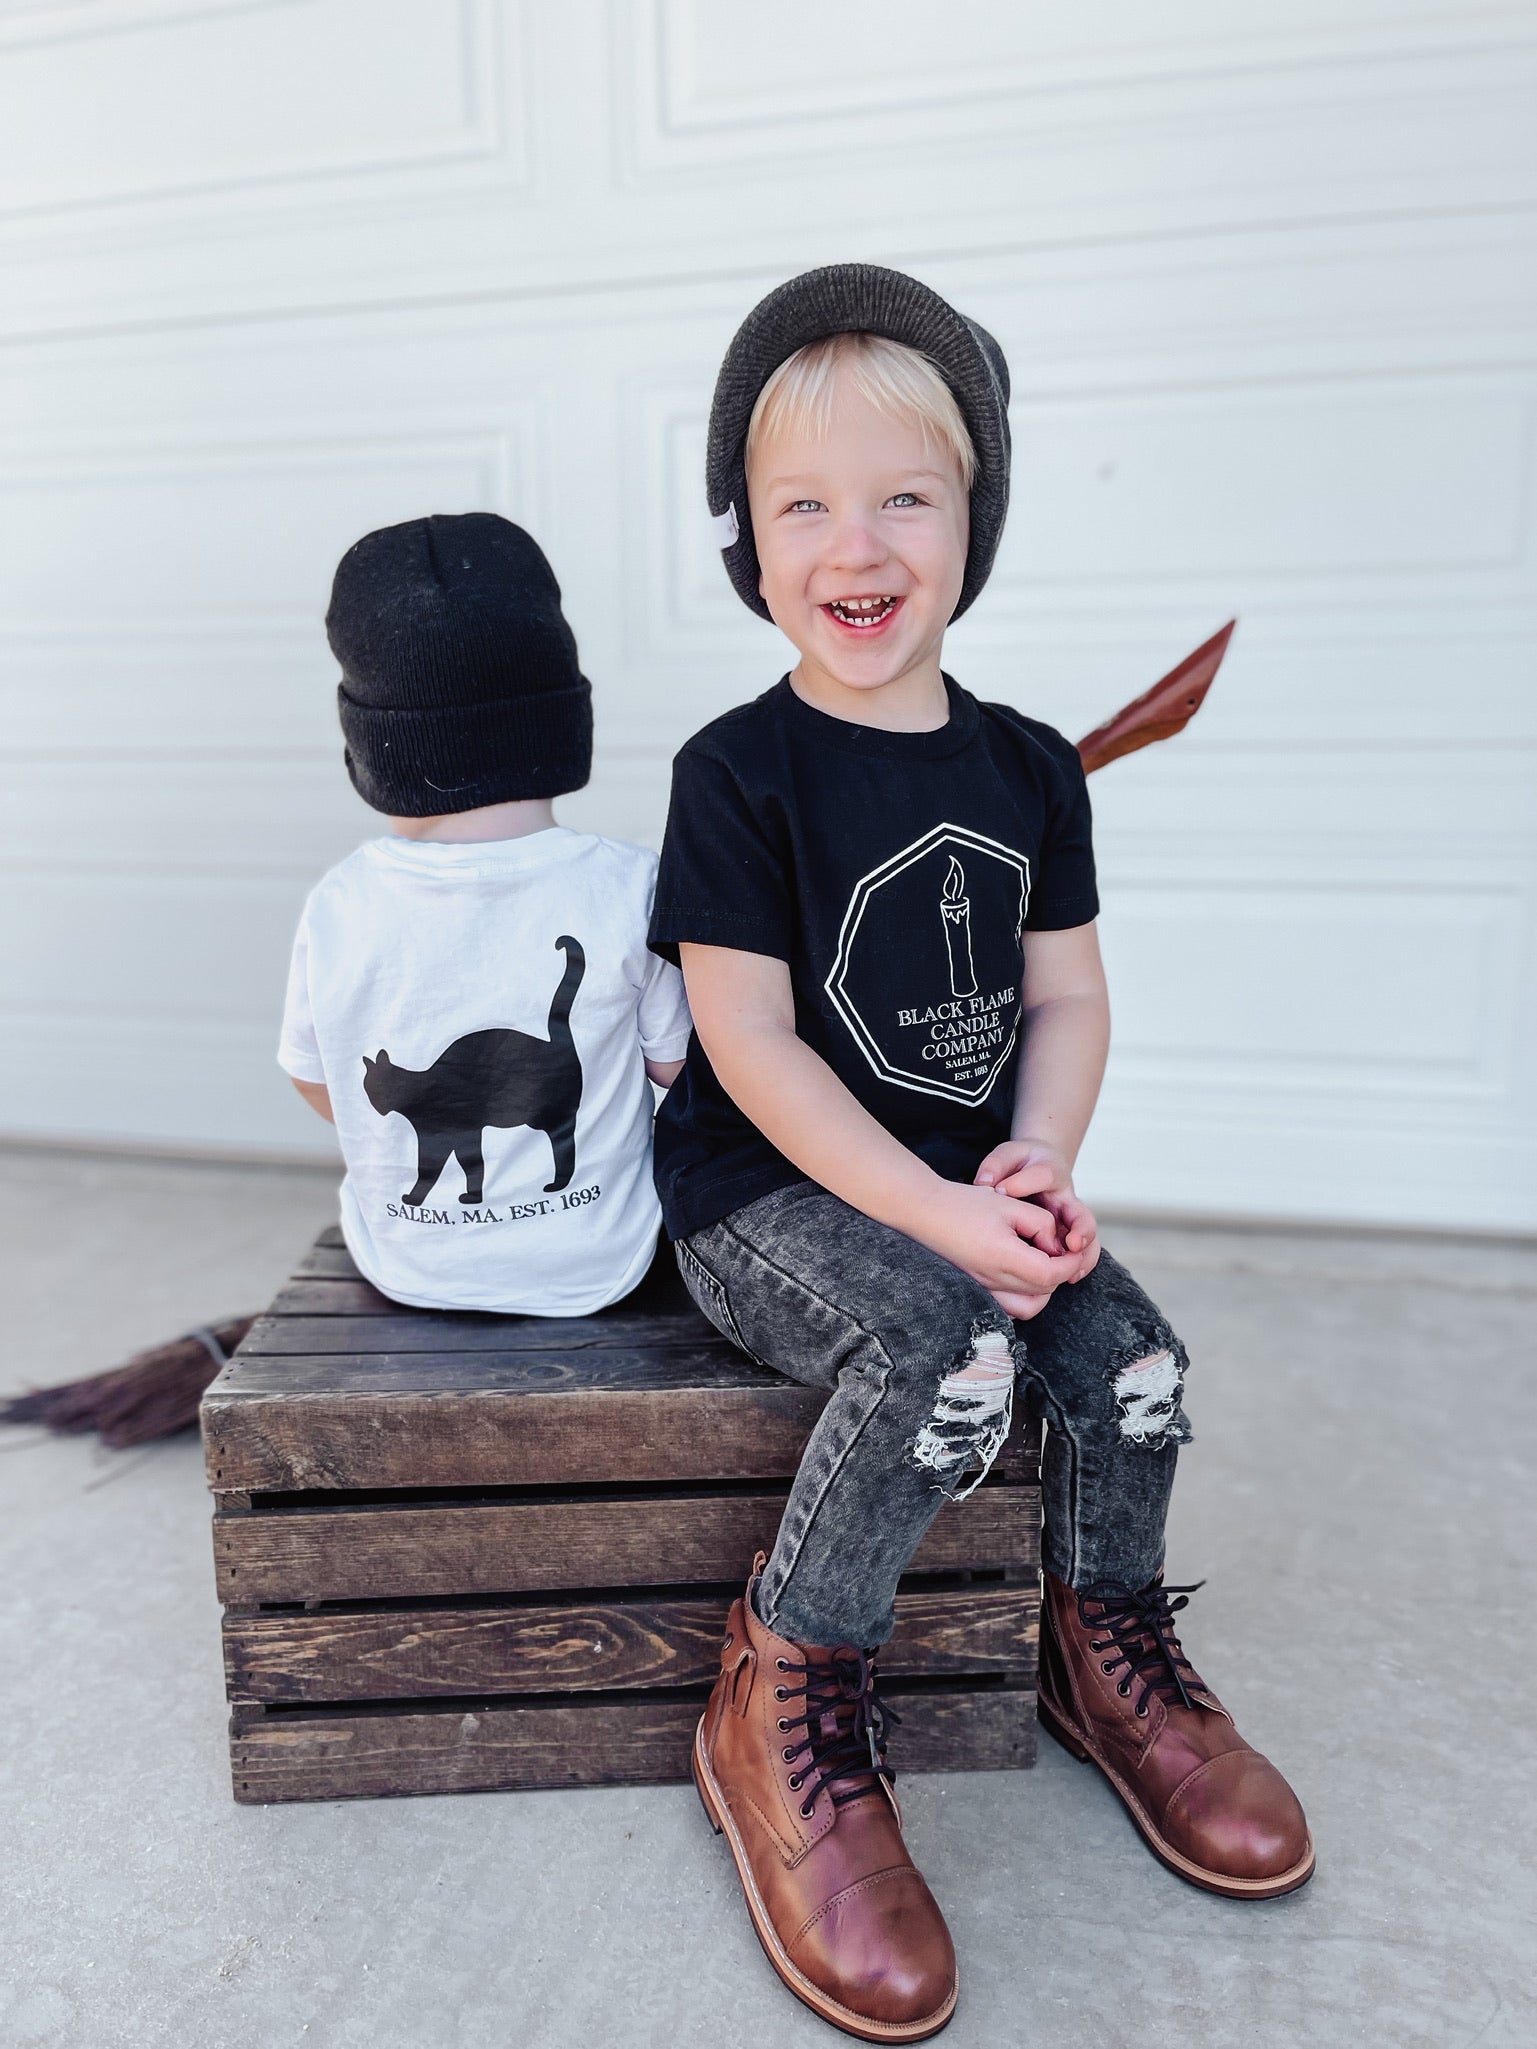 2 little boys wearing Hocus Pocus shirts. The shirt has a "Binx Candle Security" badge on the front left breast pocket area. The back of the shirt has a silhouette of a black cat and the words Salem, MA. EST. 1693 under it. 